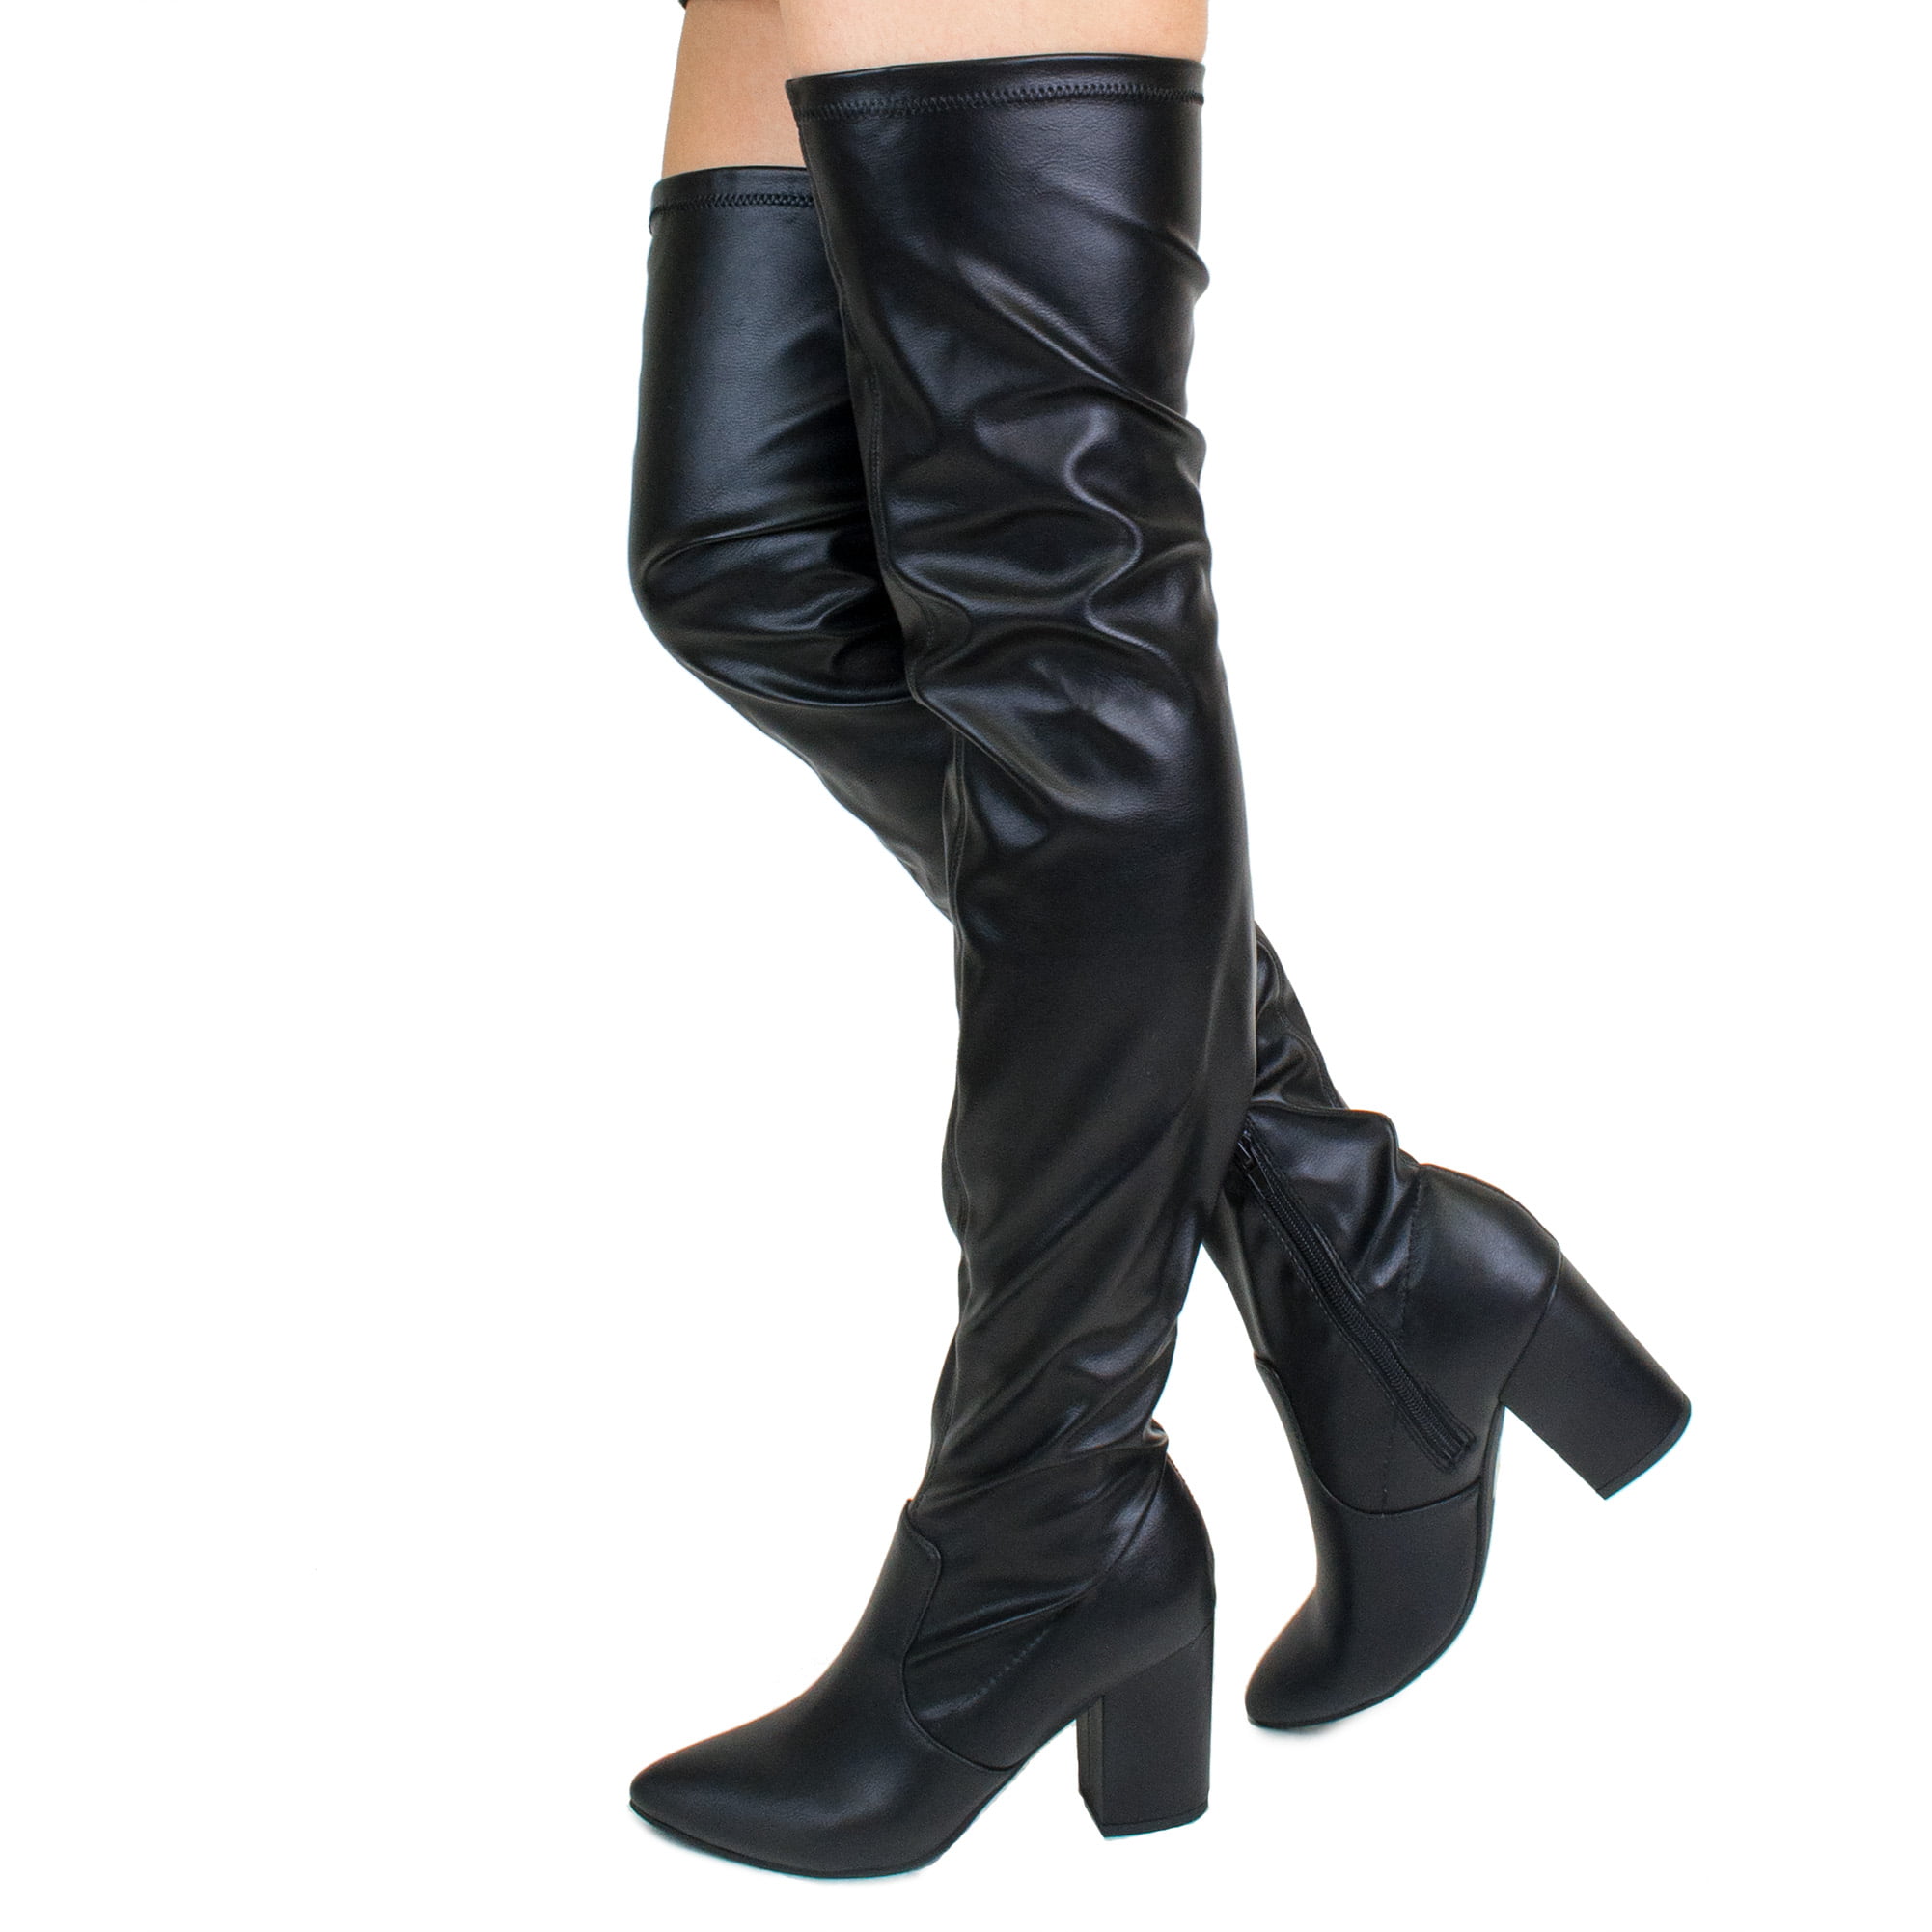 Womens Thigh High Boots Ladies Stretch Suede Over The Knee Low Heel Shoes Size 